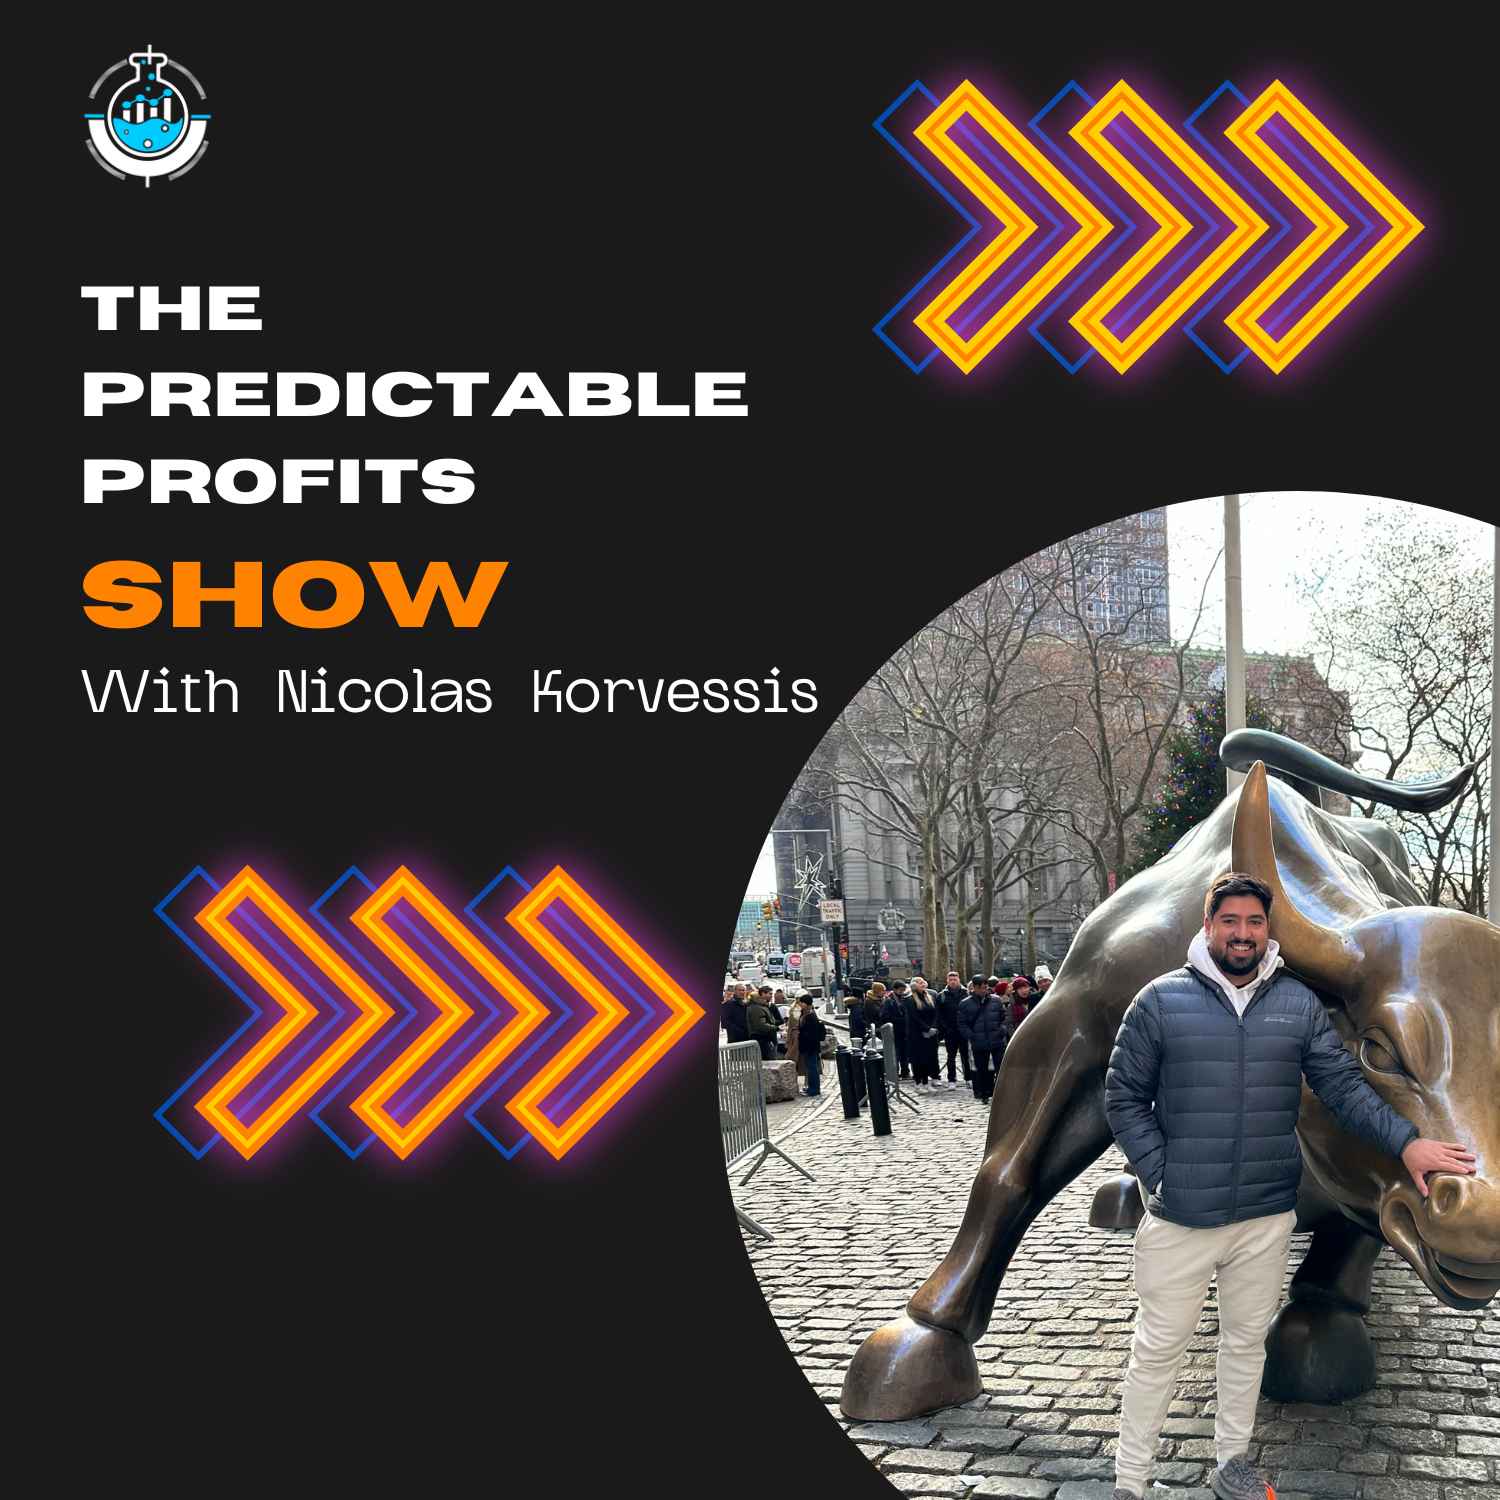 Artwork for The Predictable Profits Show With Nicolas Korvessis